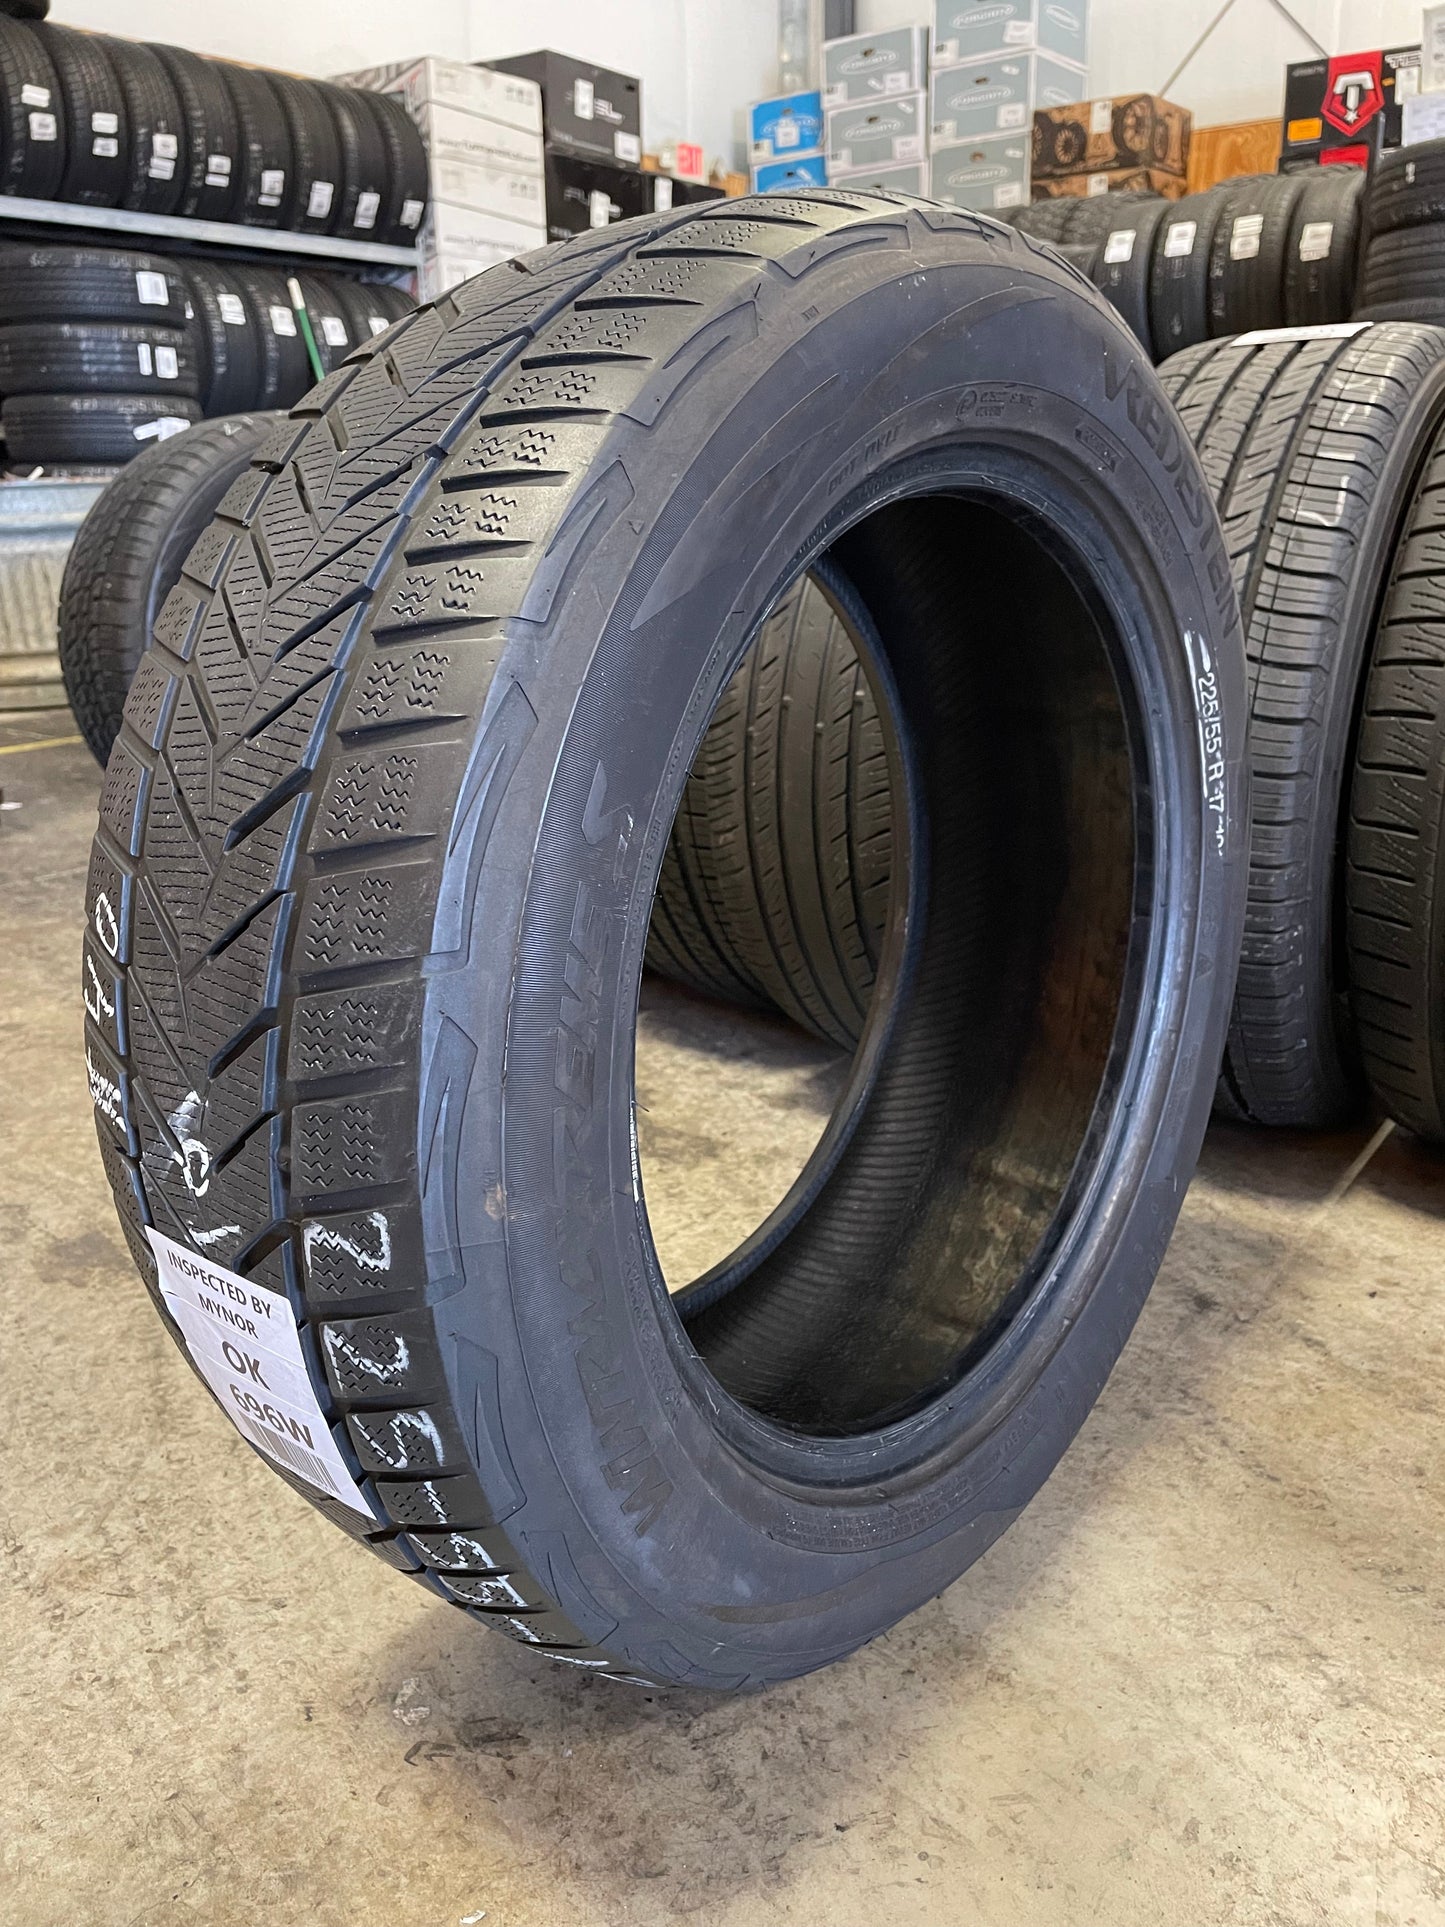 SINGLE 225/55R17 Vredestein Wintrac Xtreme 5 101 V XL - Used Tires